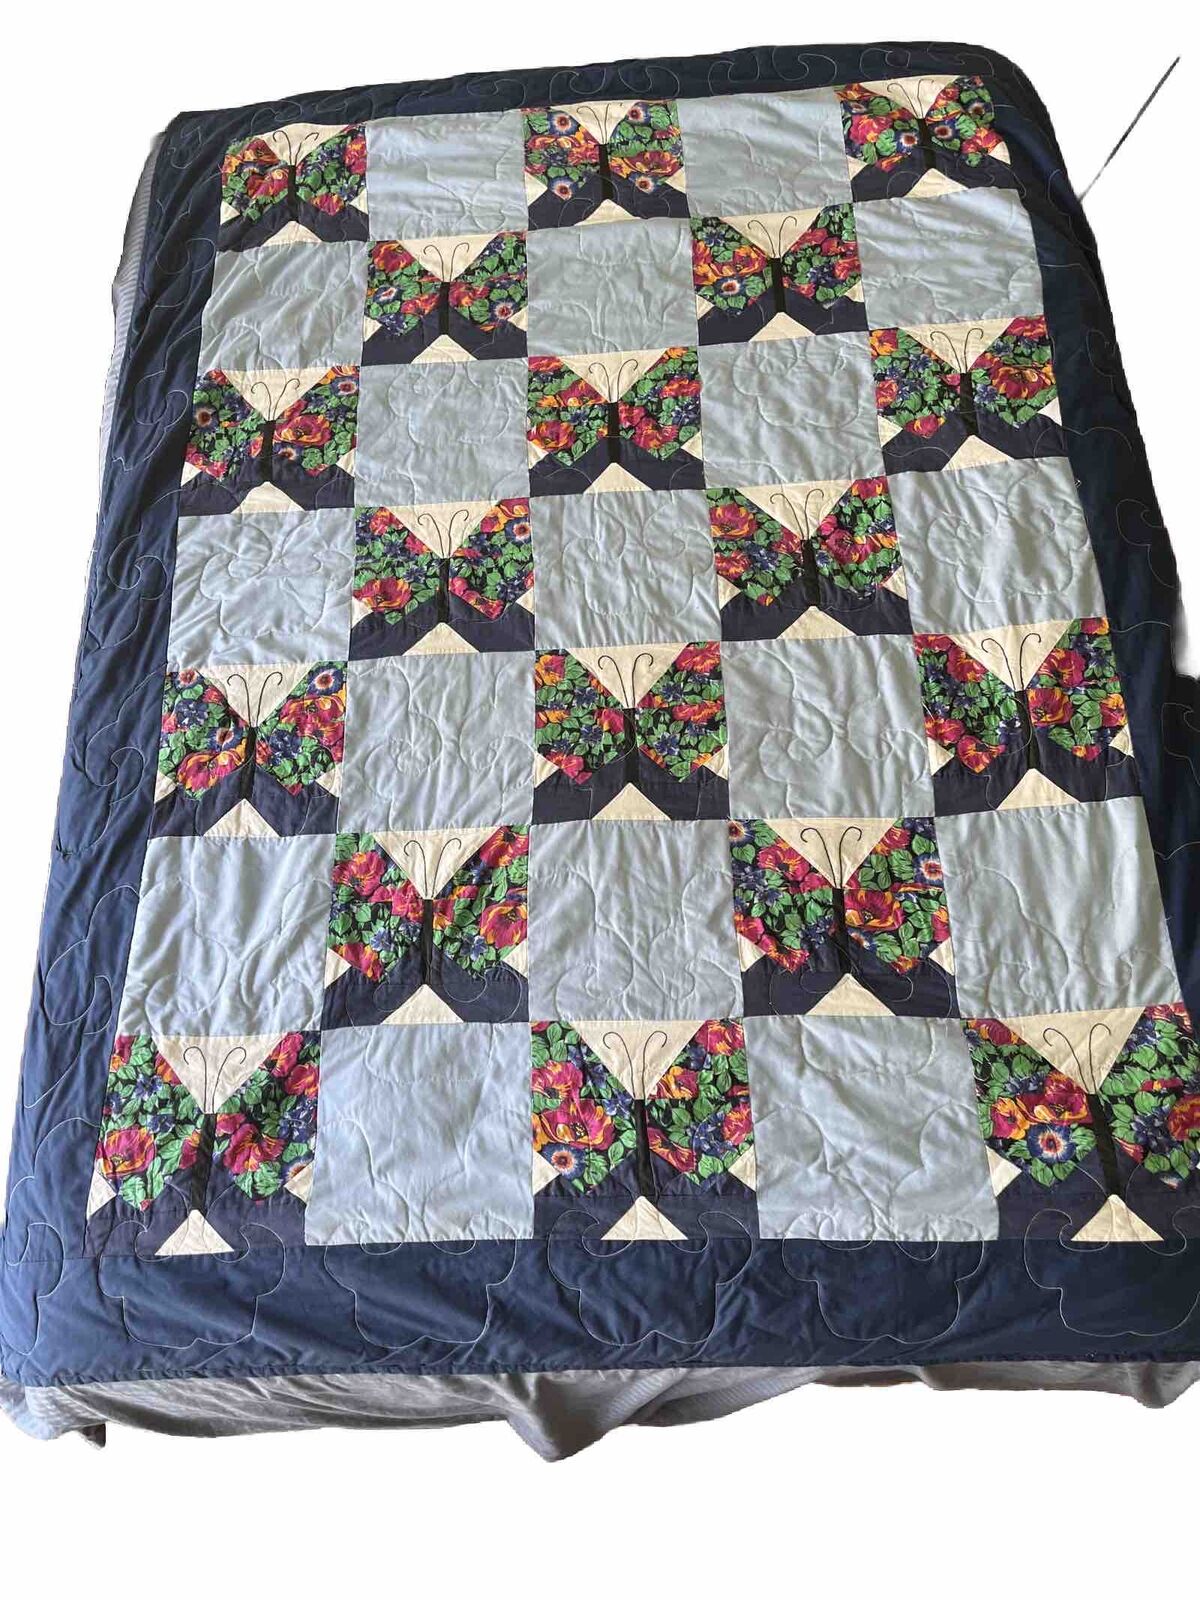 Handmade Butterfly Quilt Colorful Flowers Queen Full Twin 58” By 80”